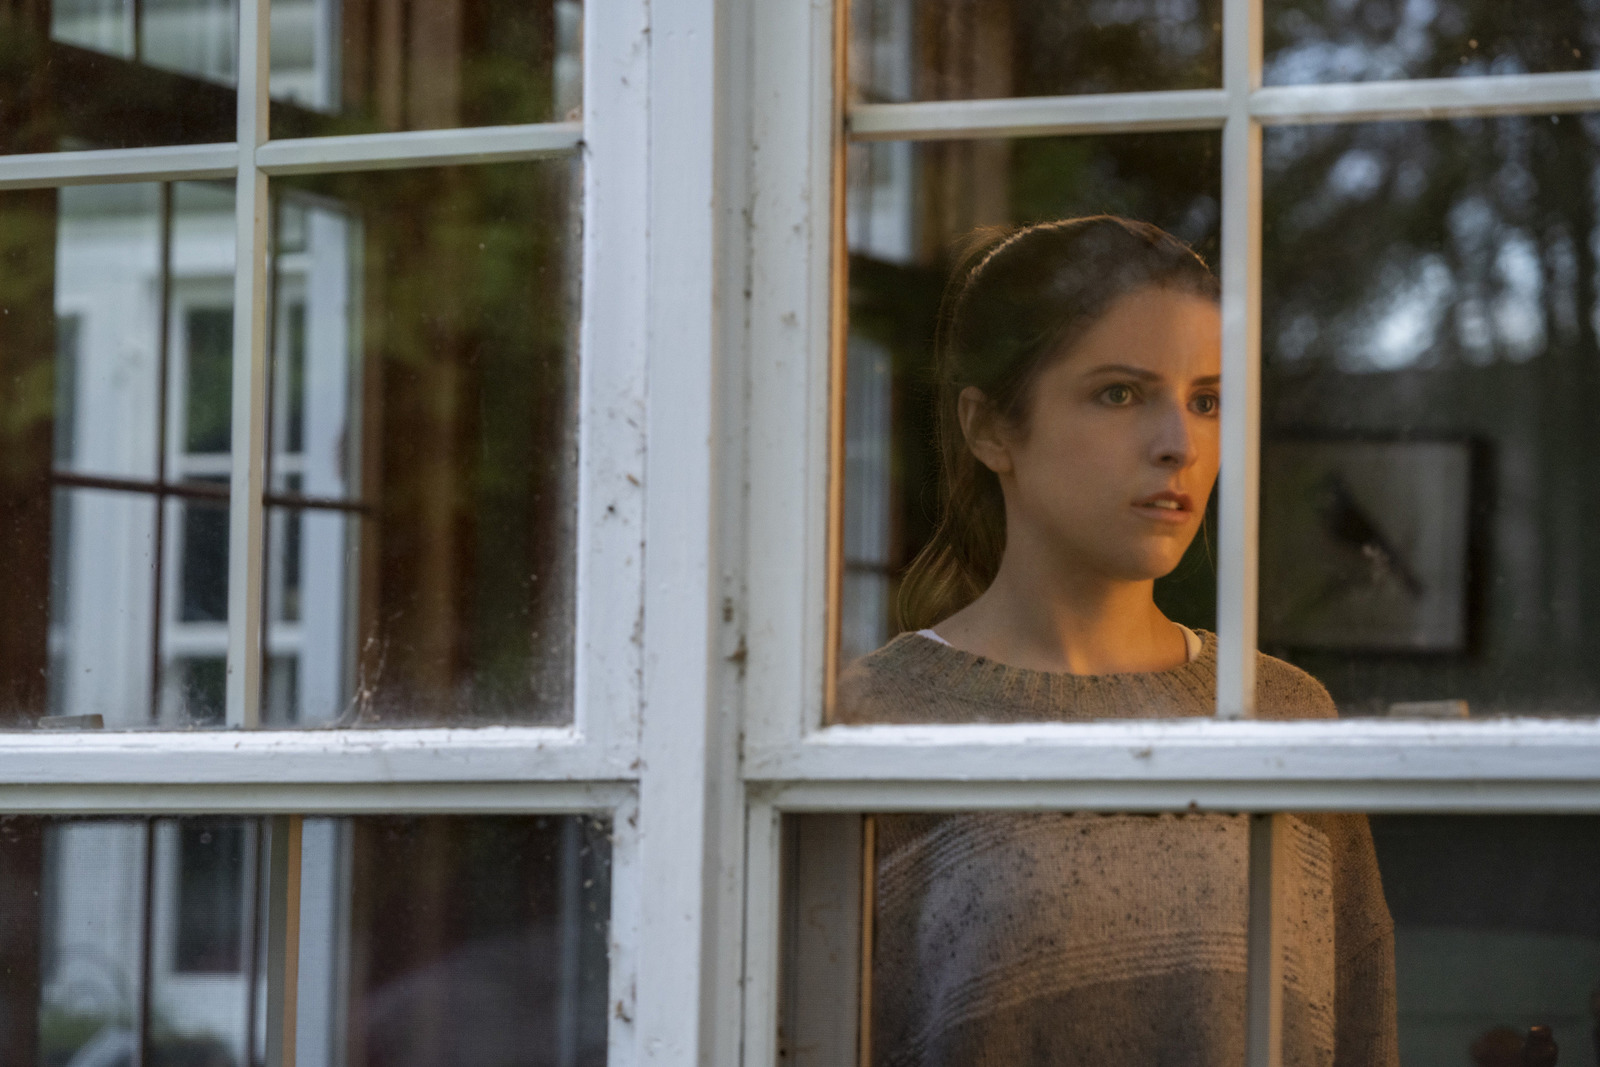 Alice, Darling Trailer Has Anna Kendrick Torn in Abusive Relationship